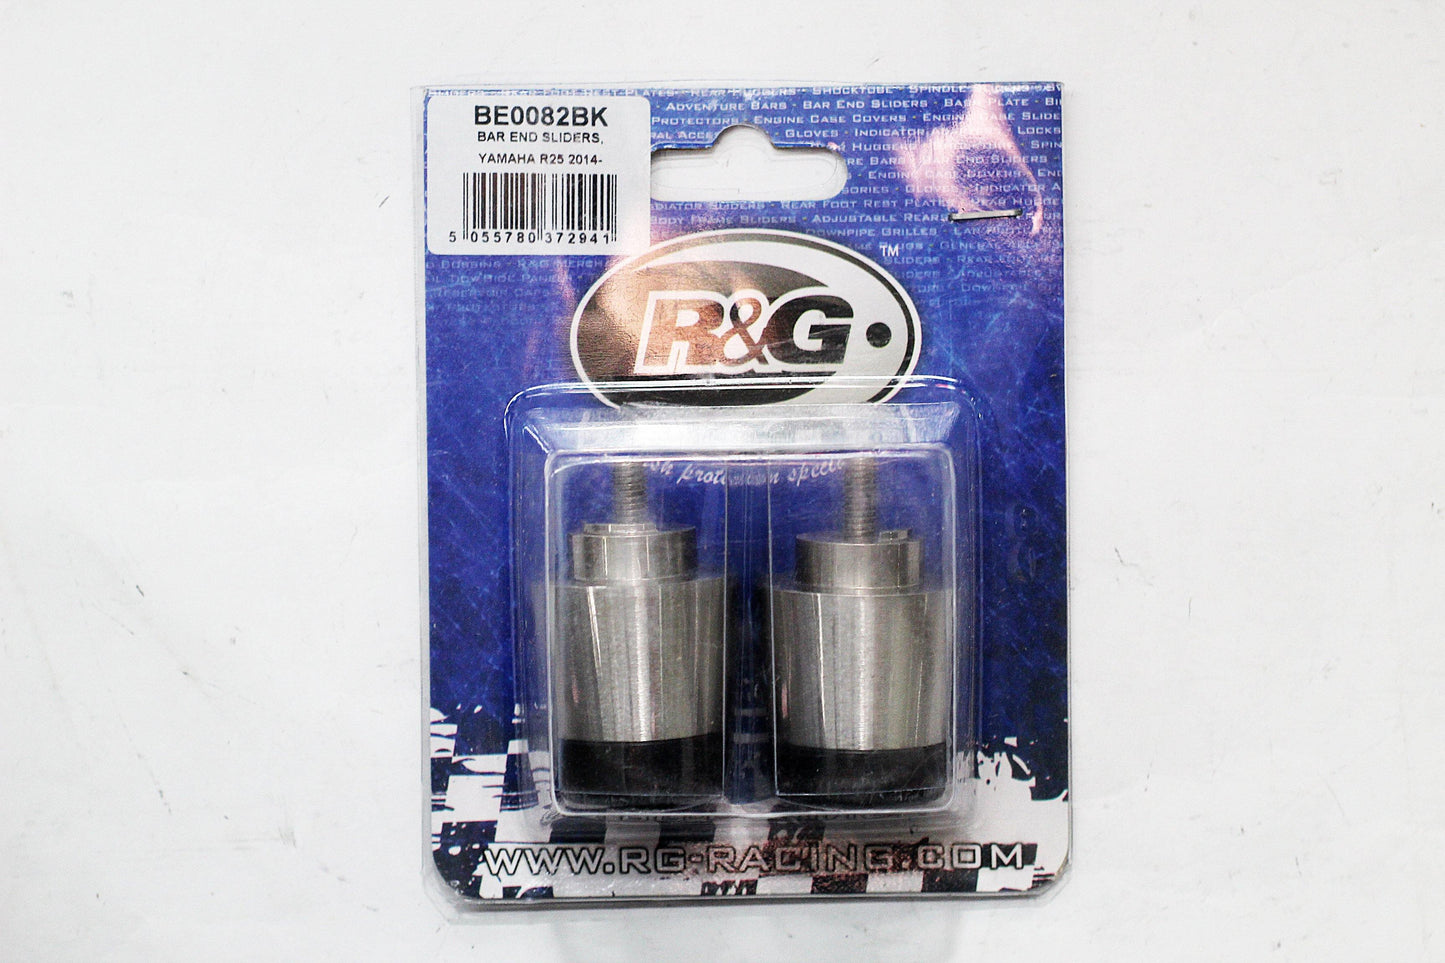 R&G Bar End Sliders fits for Yamaha R25 ('14-) / MT-25 ('15-) / R3 ('15-) / MT-03 ('16-) / NMAX 125 ('17-) - Durian Bikers